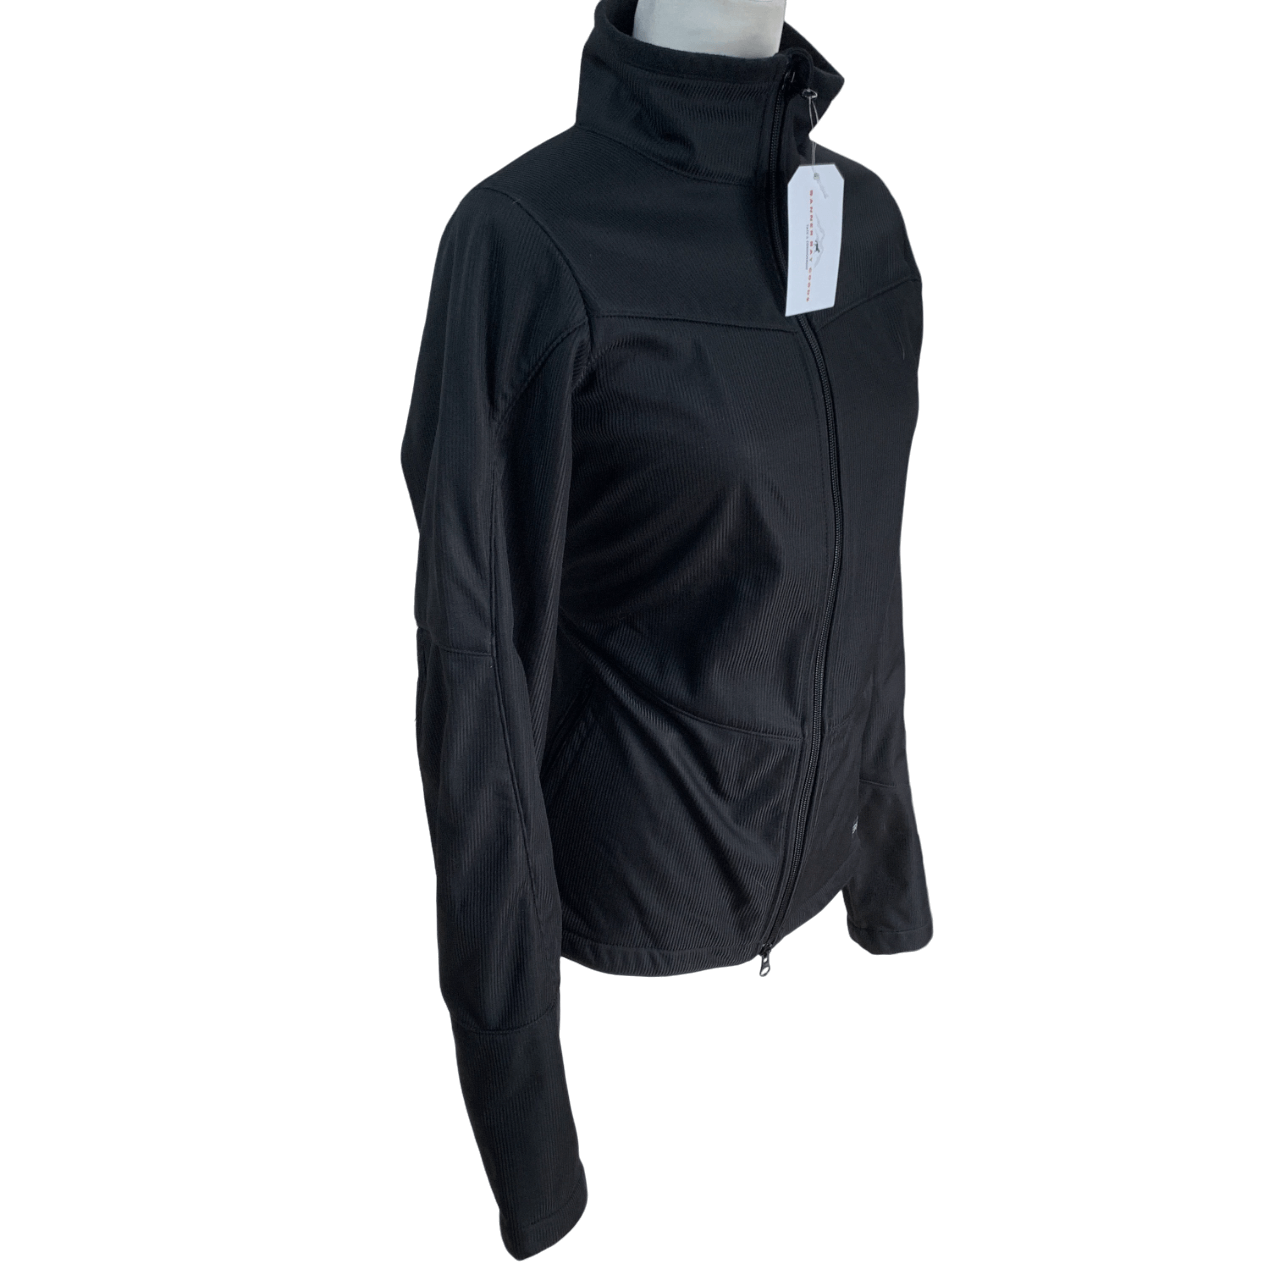 Kerrits Softshell Riding Jacket in Black - Woman's X-Large